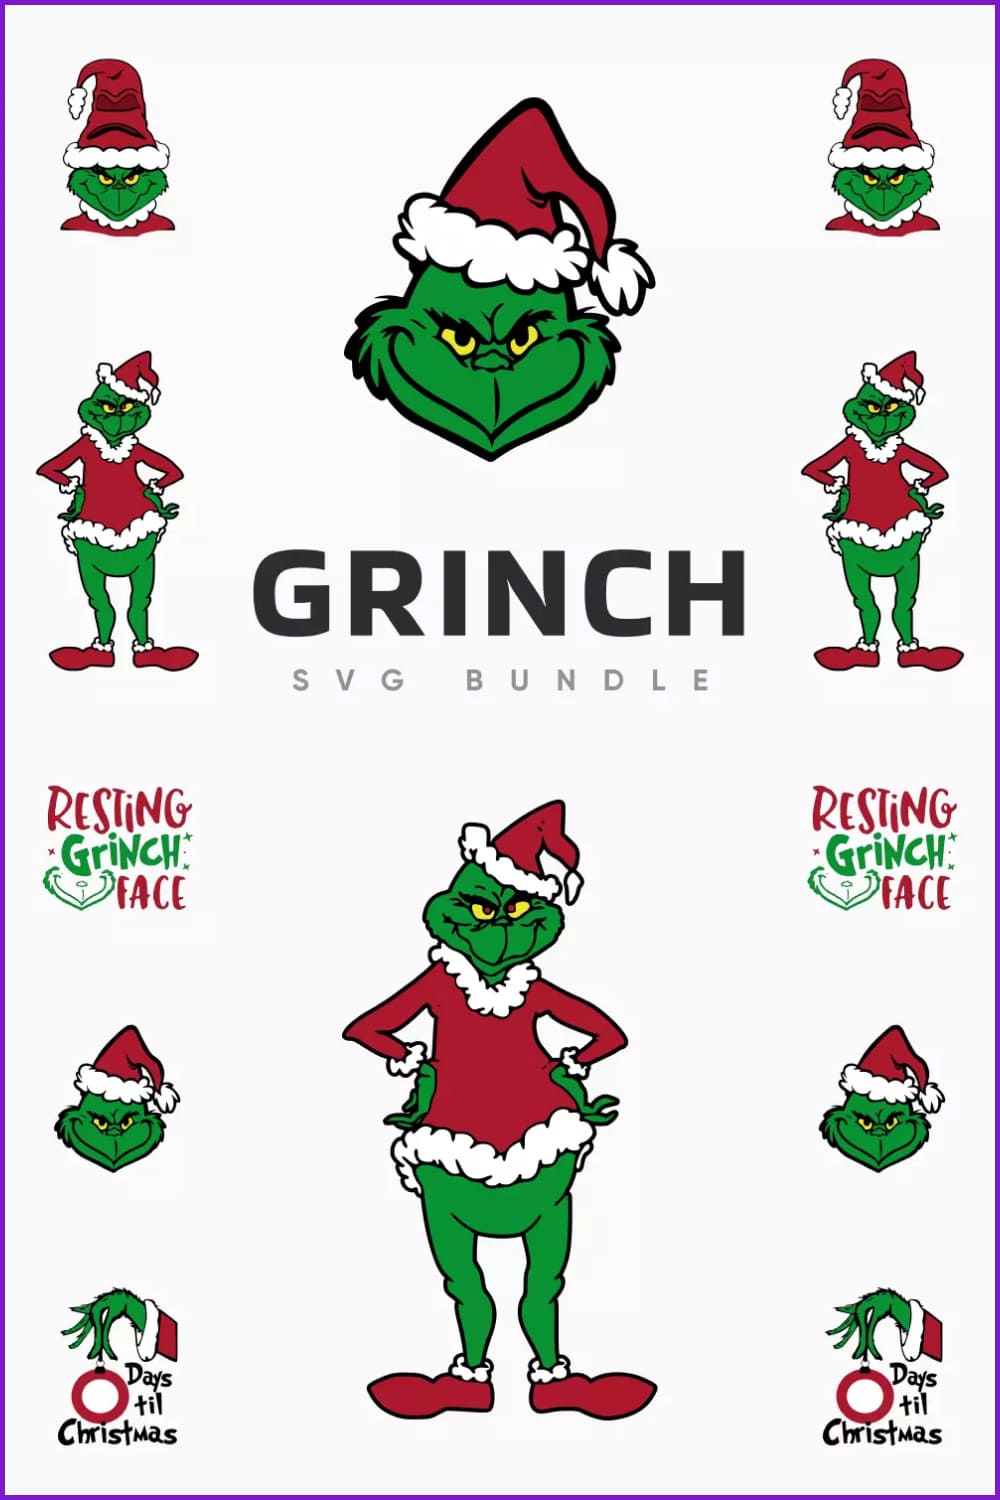 Grinch in funny pose.